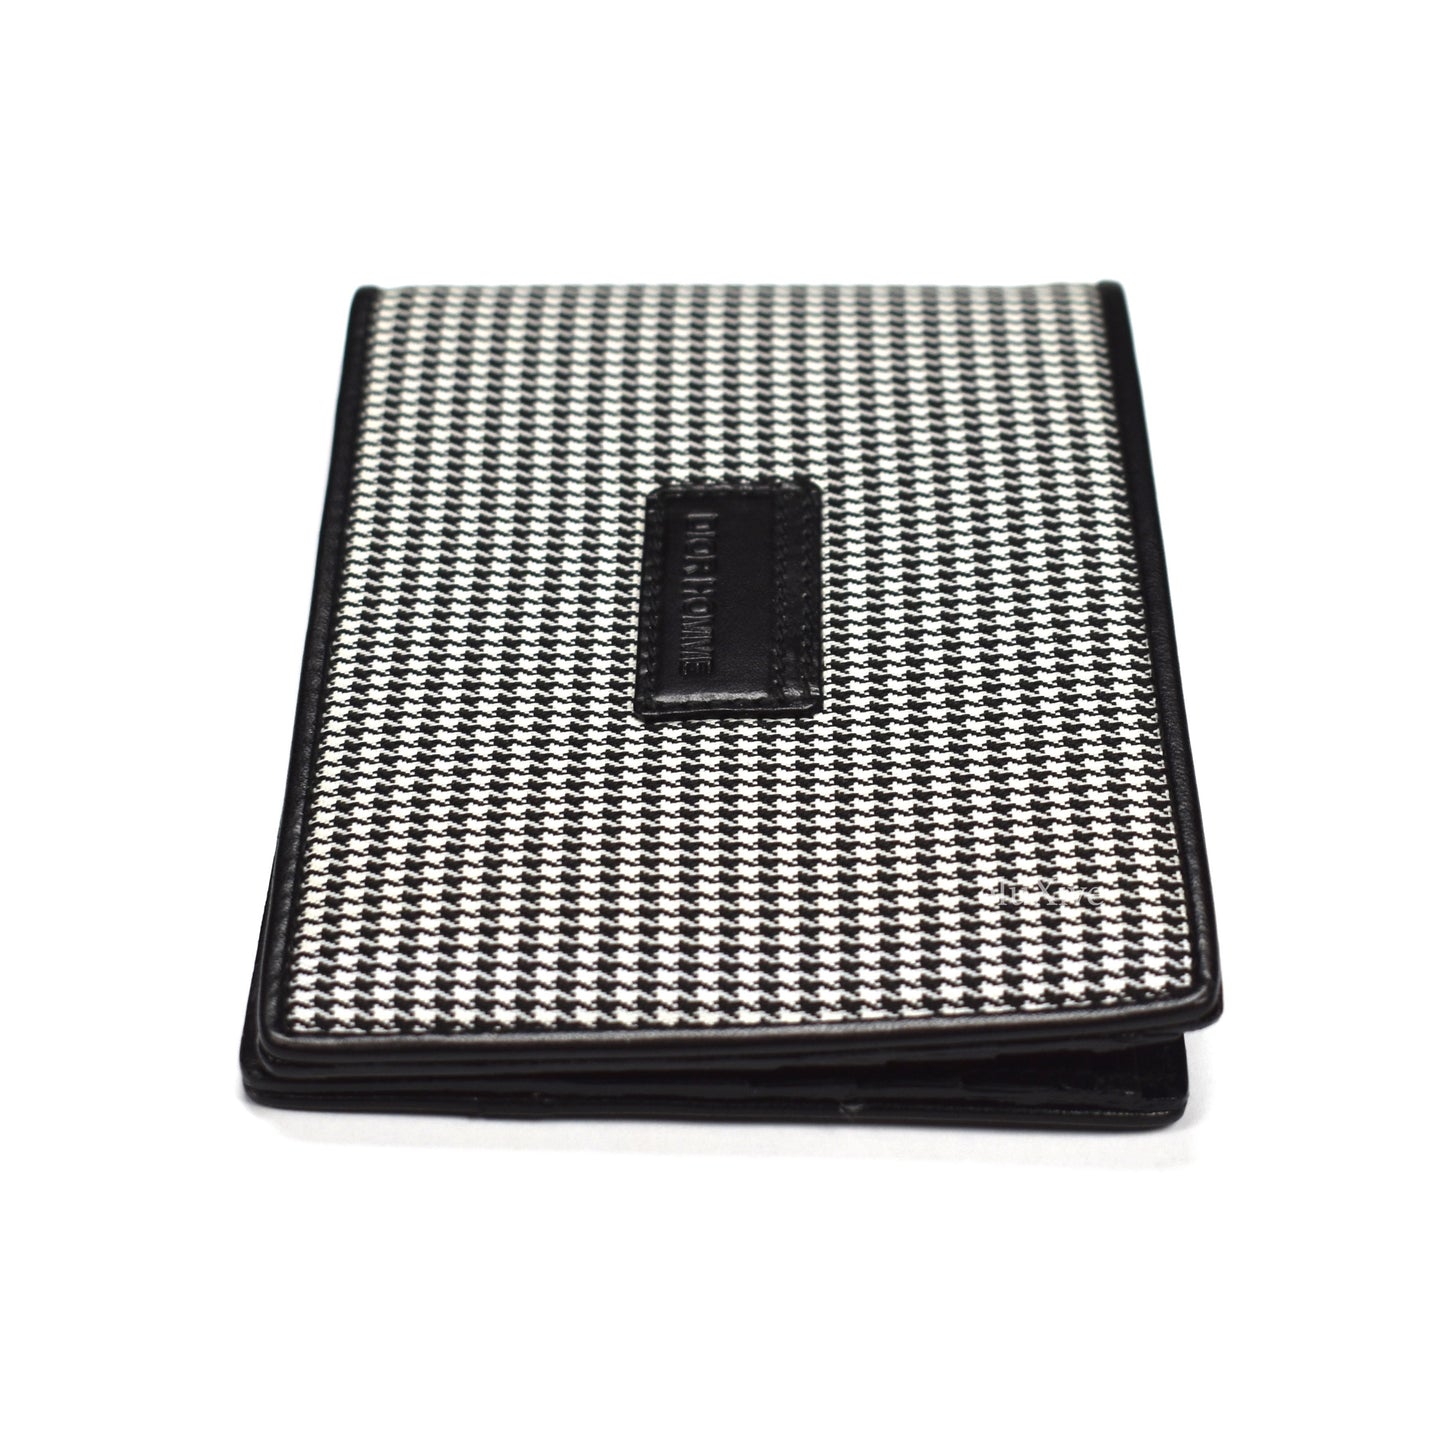 Dior - Houndstooth Woven Bifold Wallet